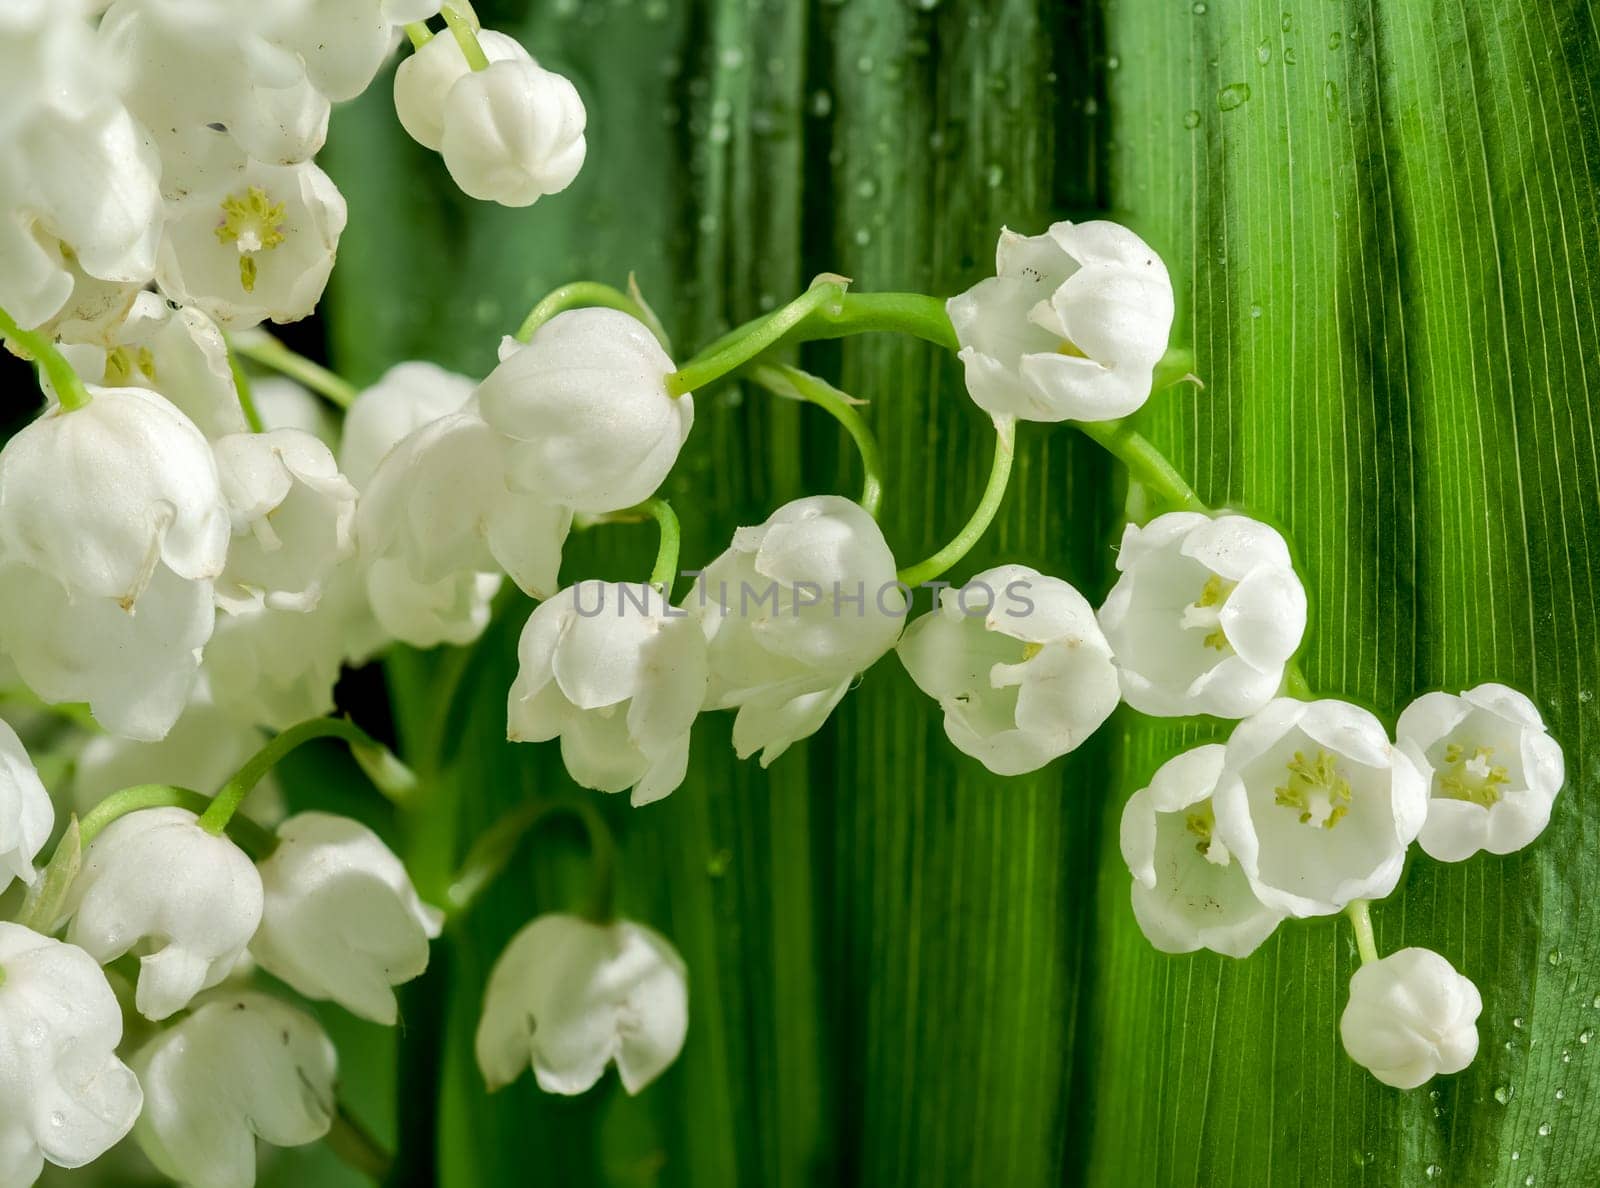 Beautiful blooming white Lily of the valley flower. Flower head close-up.